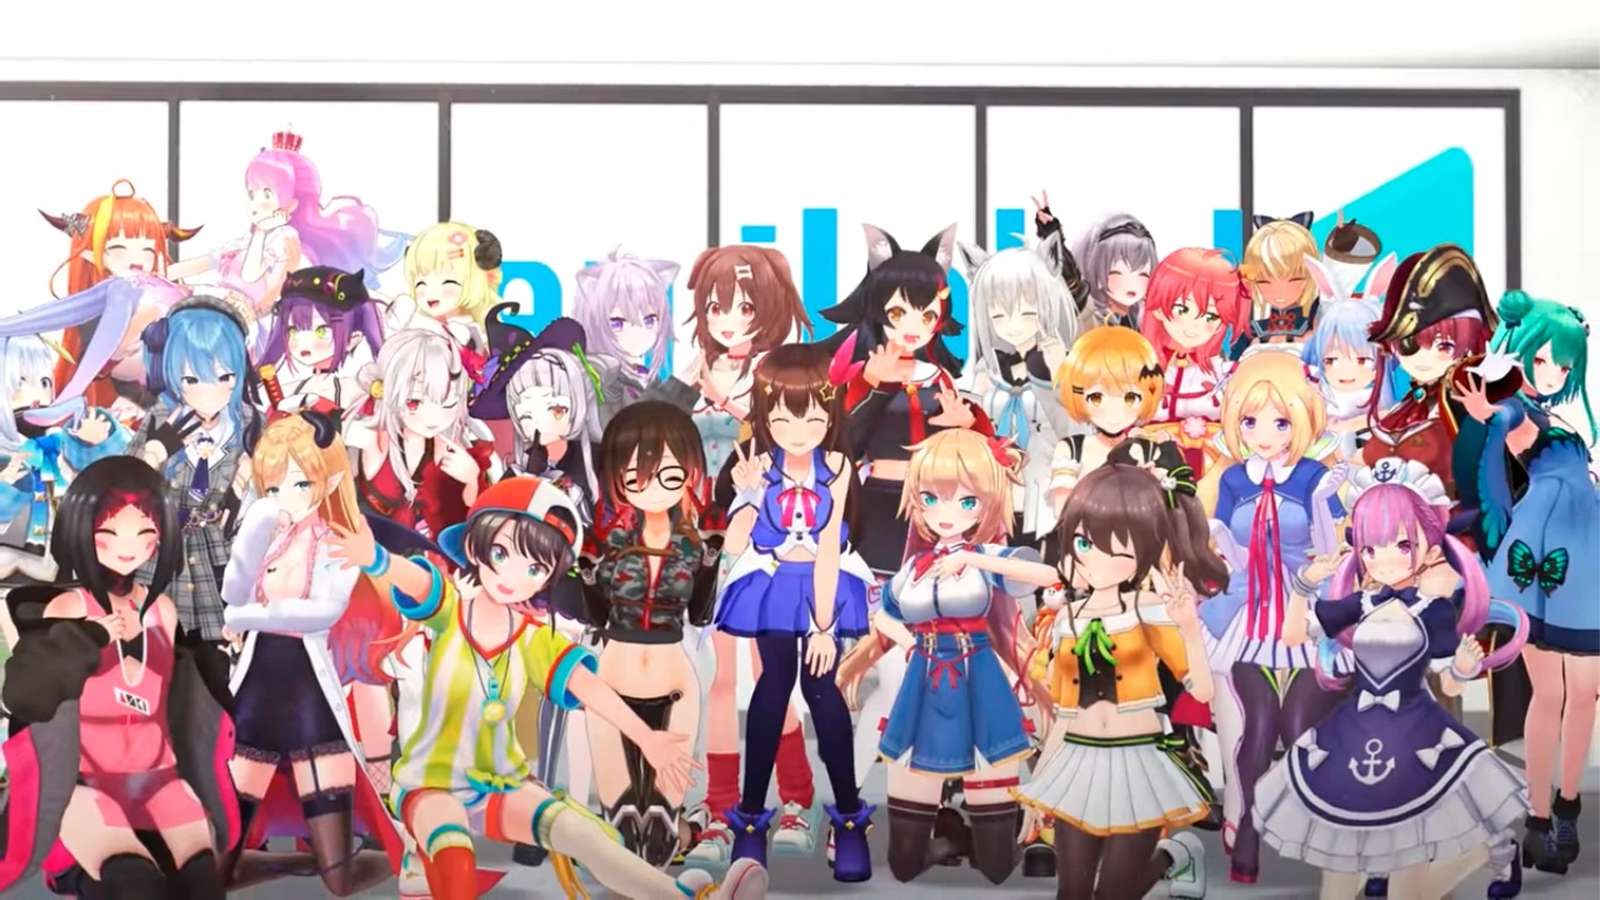 Hololive group photo with JP generations